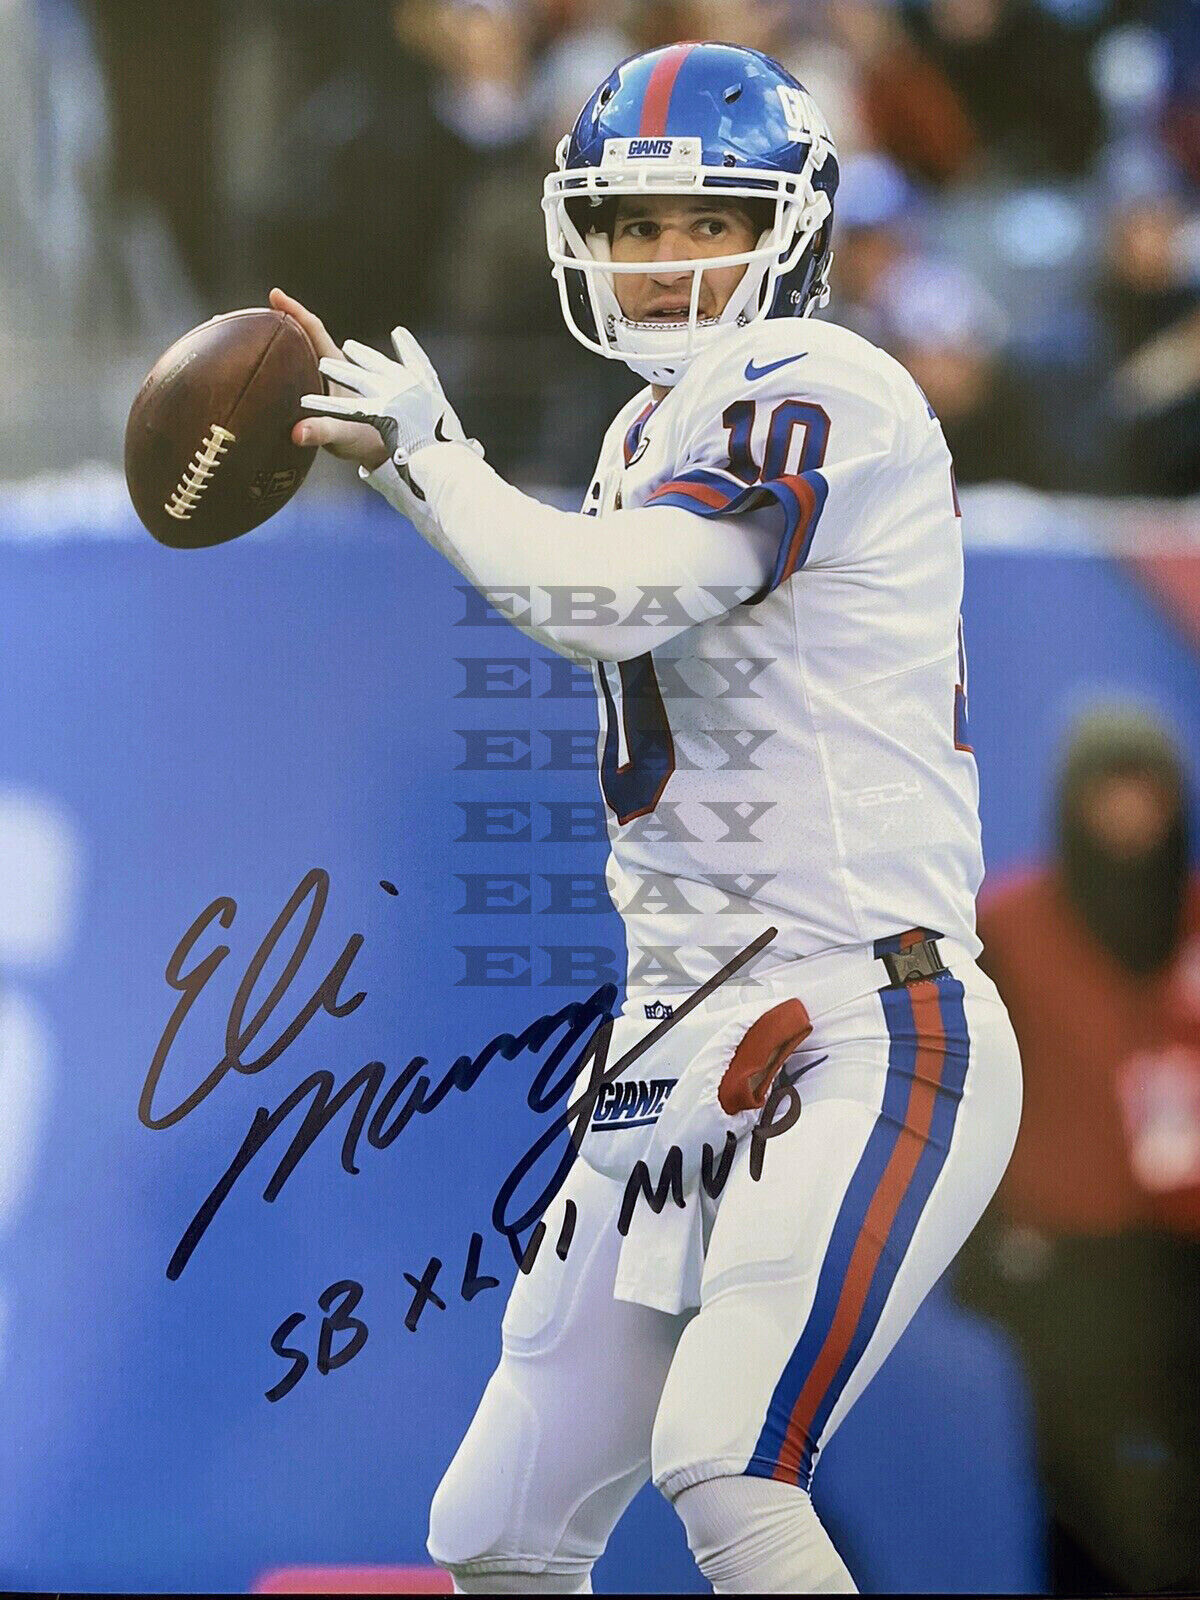 Eli Manning New York Giants Signed Autographed 8x10 Photo Poster painting Reprint